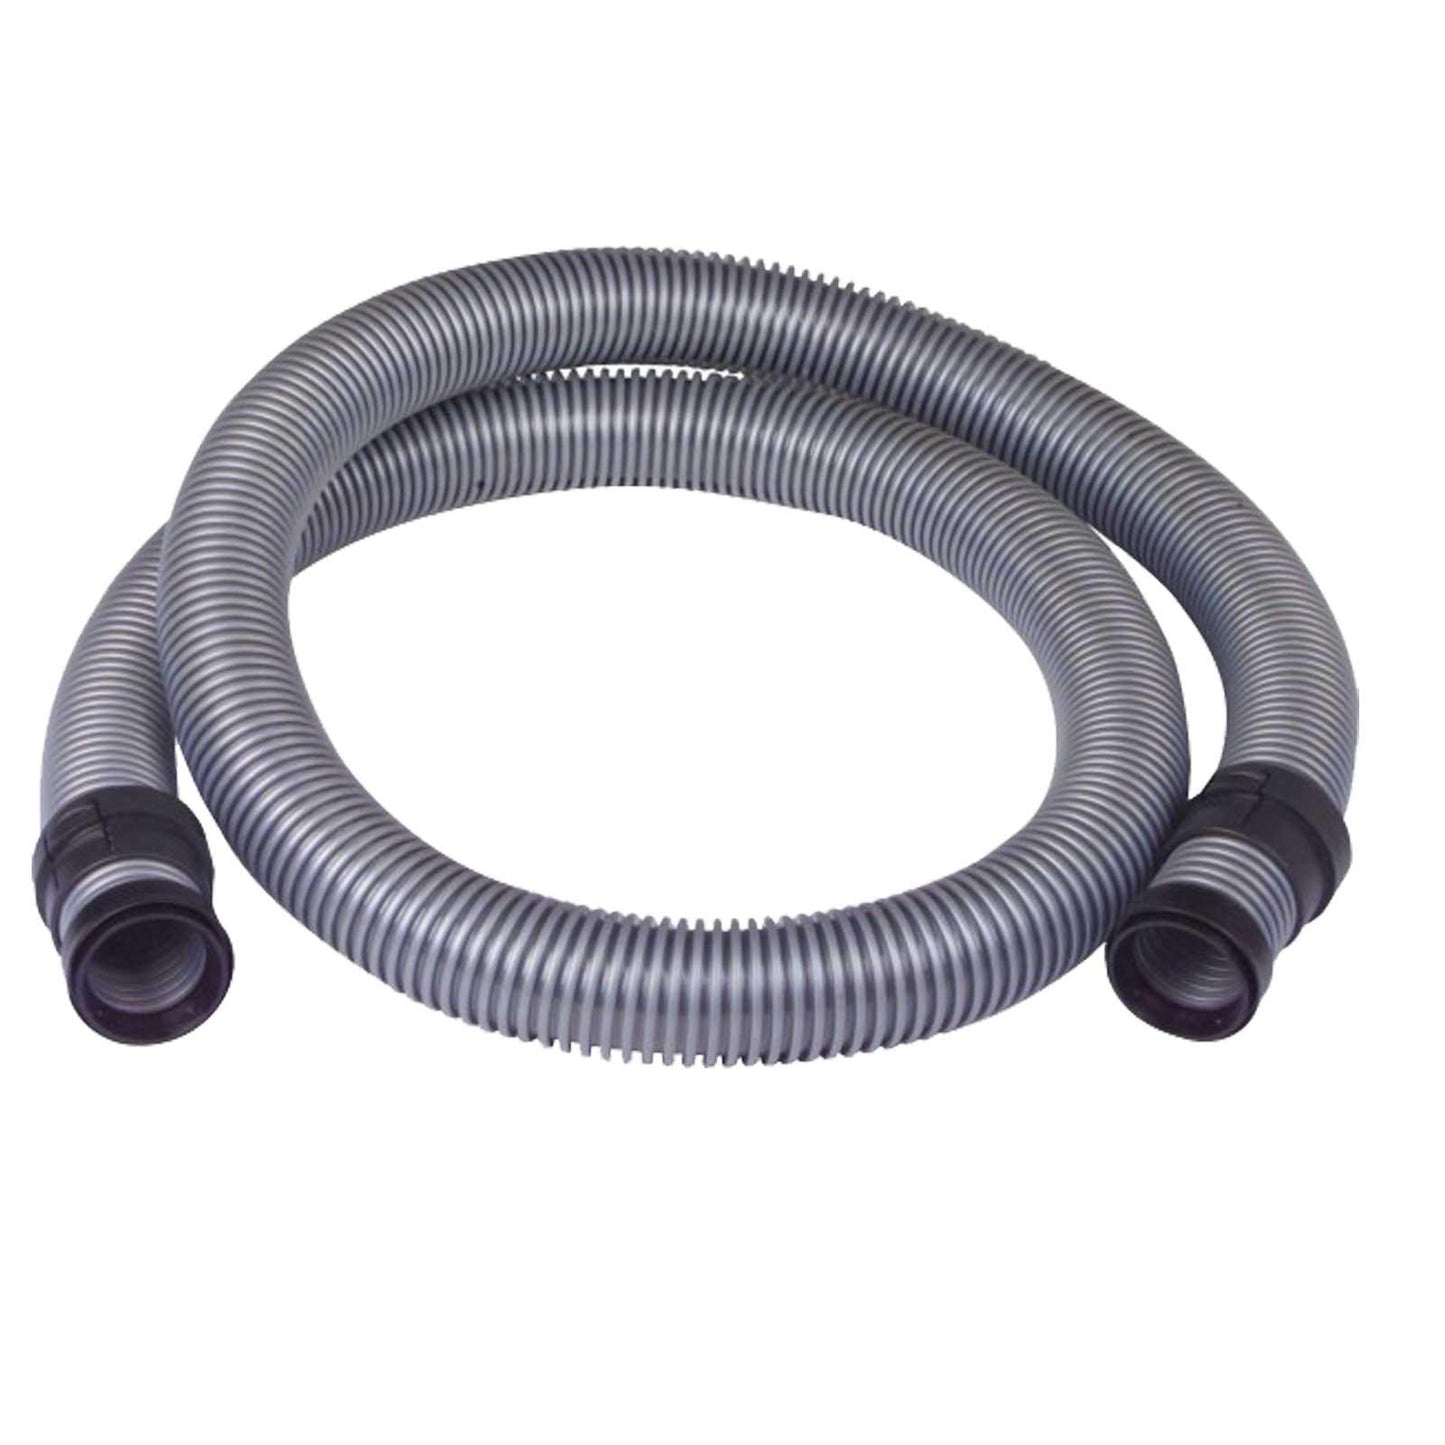 Vacuum Cleaner Hose Handle for Miele Classic C1 S2 S700 07736191 Sparesbarn